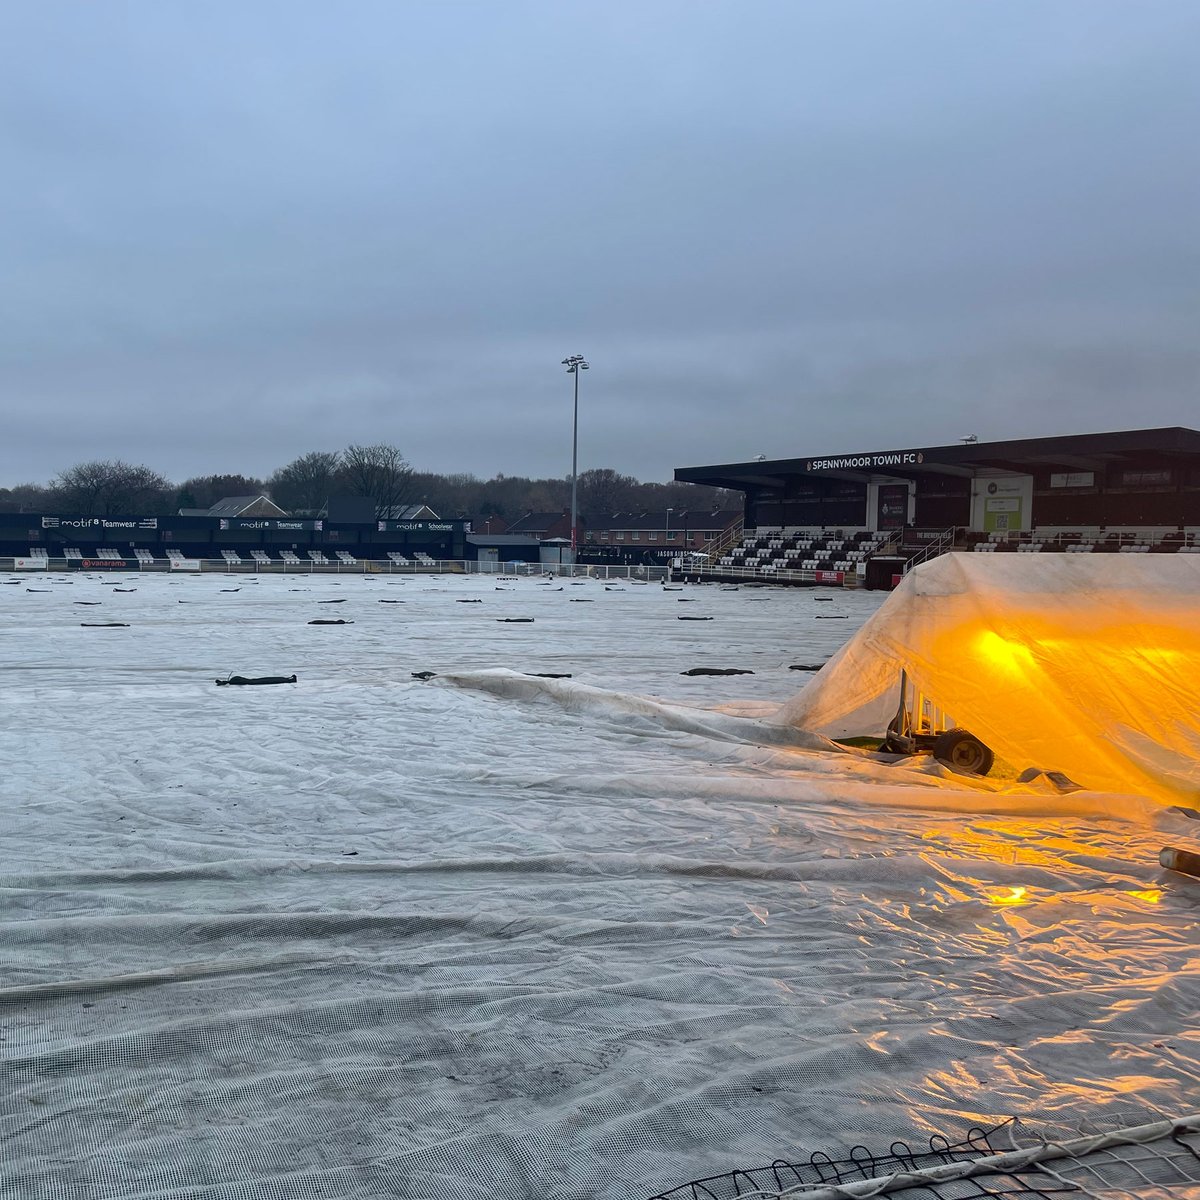 The Club is making available for sale 8 @matchsaver pitch covers which can protect a playing surface of up to 107m by 67m against: ❄️ Snow 🥶 Frost 🌧️ Rain We’re looking for £6,000 or nearest offer. Contact our Head Groundsman Mark Sleightholme now on 07990 974 088. #Moors